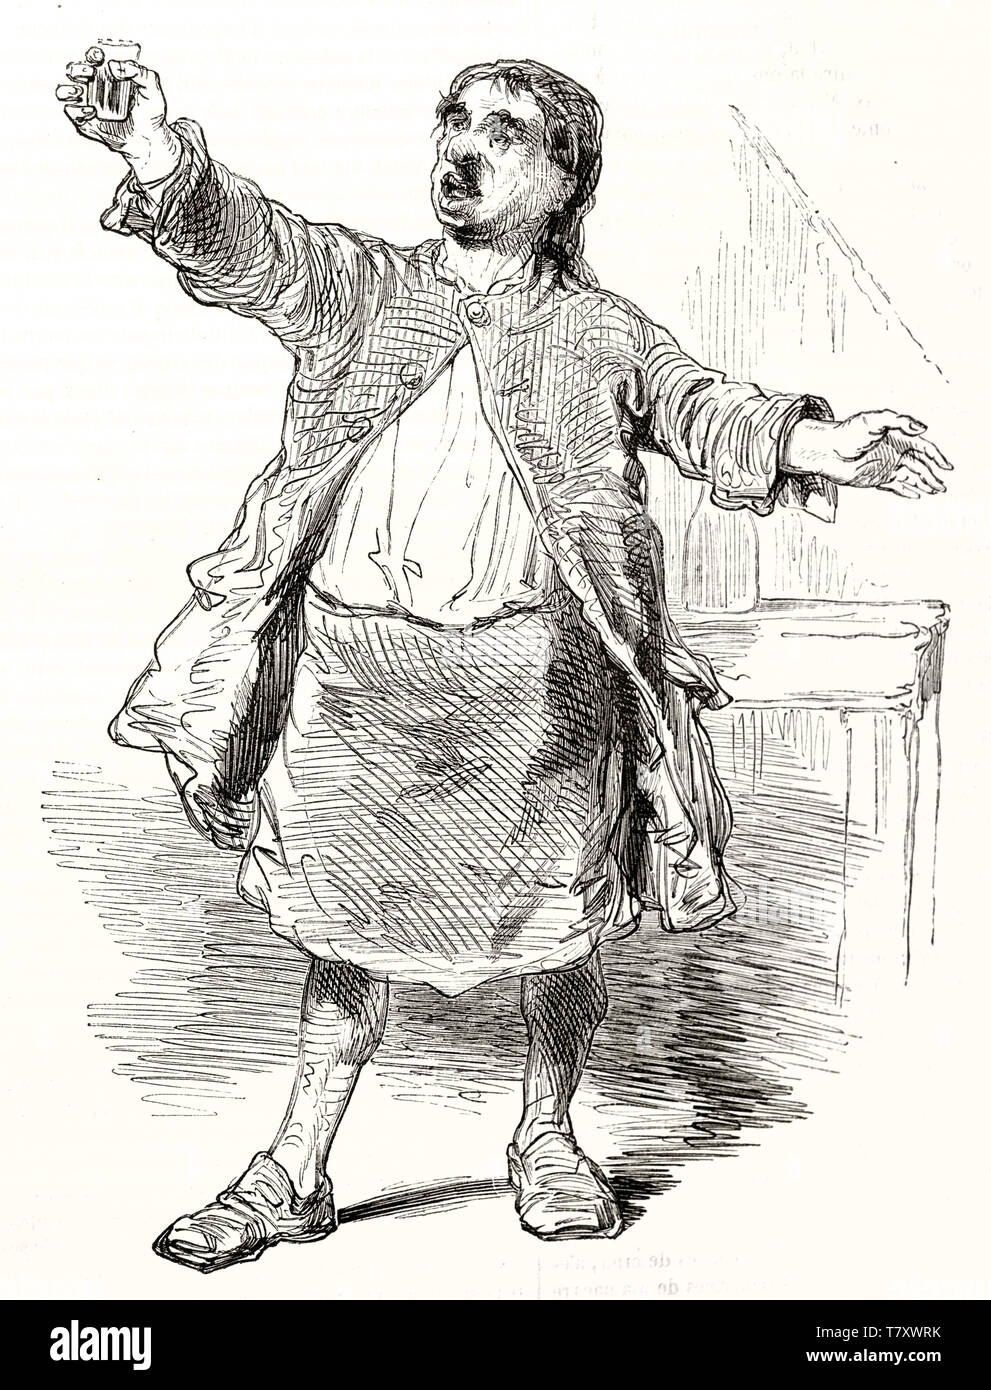 Old rough style illustration depicting the king of drunkards, full body displayed and holding a glass in a classic drunk man pose. By Gavarni publ. on Magasin Pittoresque Paris 1848 Stock Photo